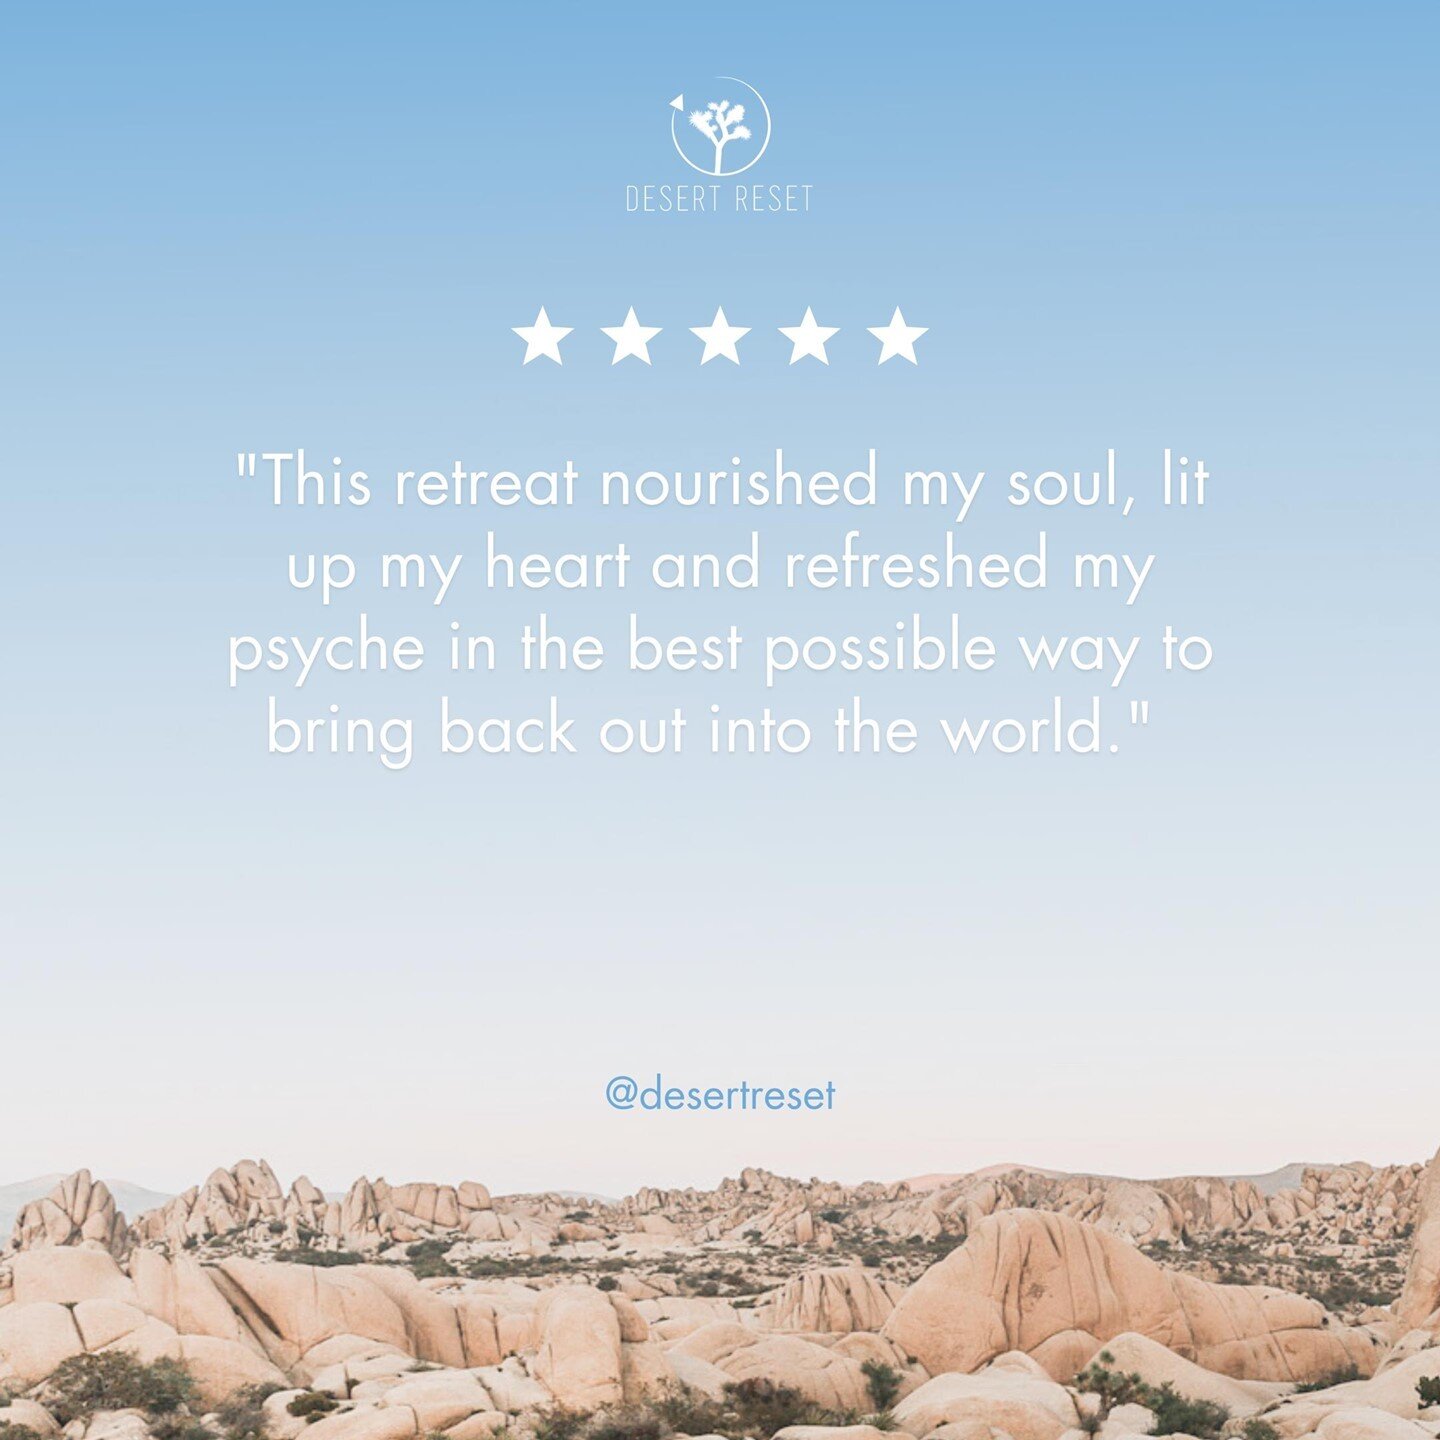 Nourish your soul ✔️⁠
Light up your heart ✔️⁠
Refresh your psyche ✔️⁠
.⁠
.⁠
.⁠
.⁠
⁠#wellnessretreat #veganretreat #thecynthiamorgan⁠
#connectwithnature #healingretreat #natureretreat #retreat #retreatyourself #retreatyourselfweekend #retreatyourselfw